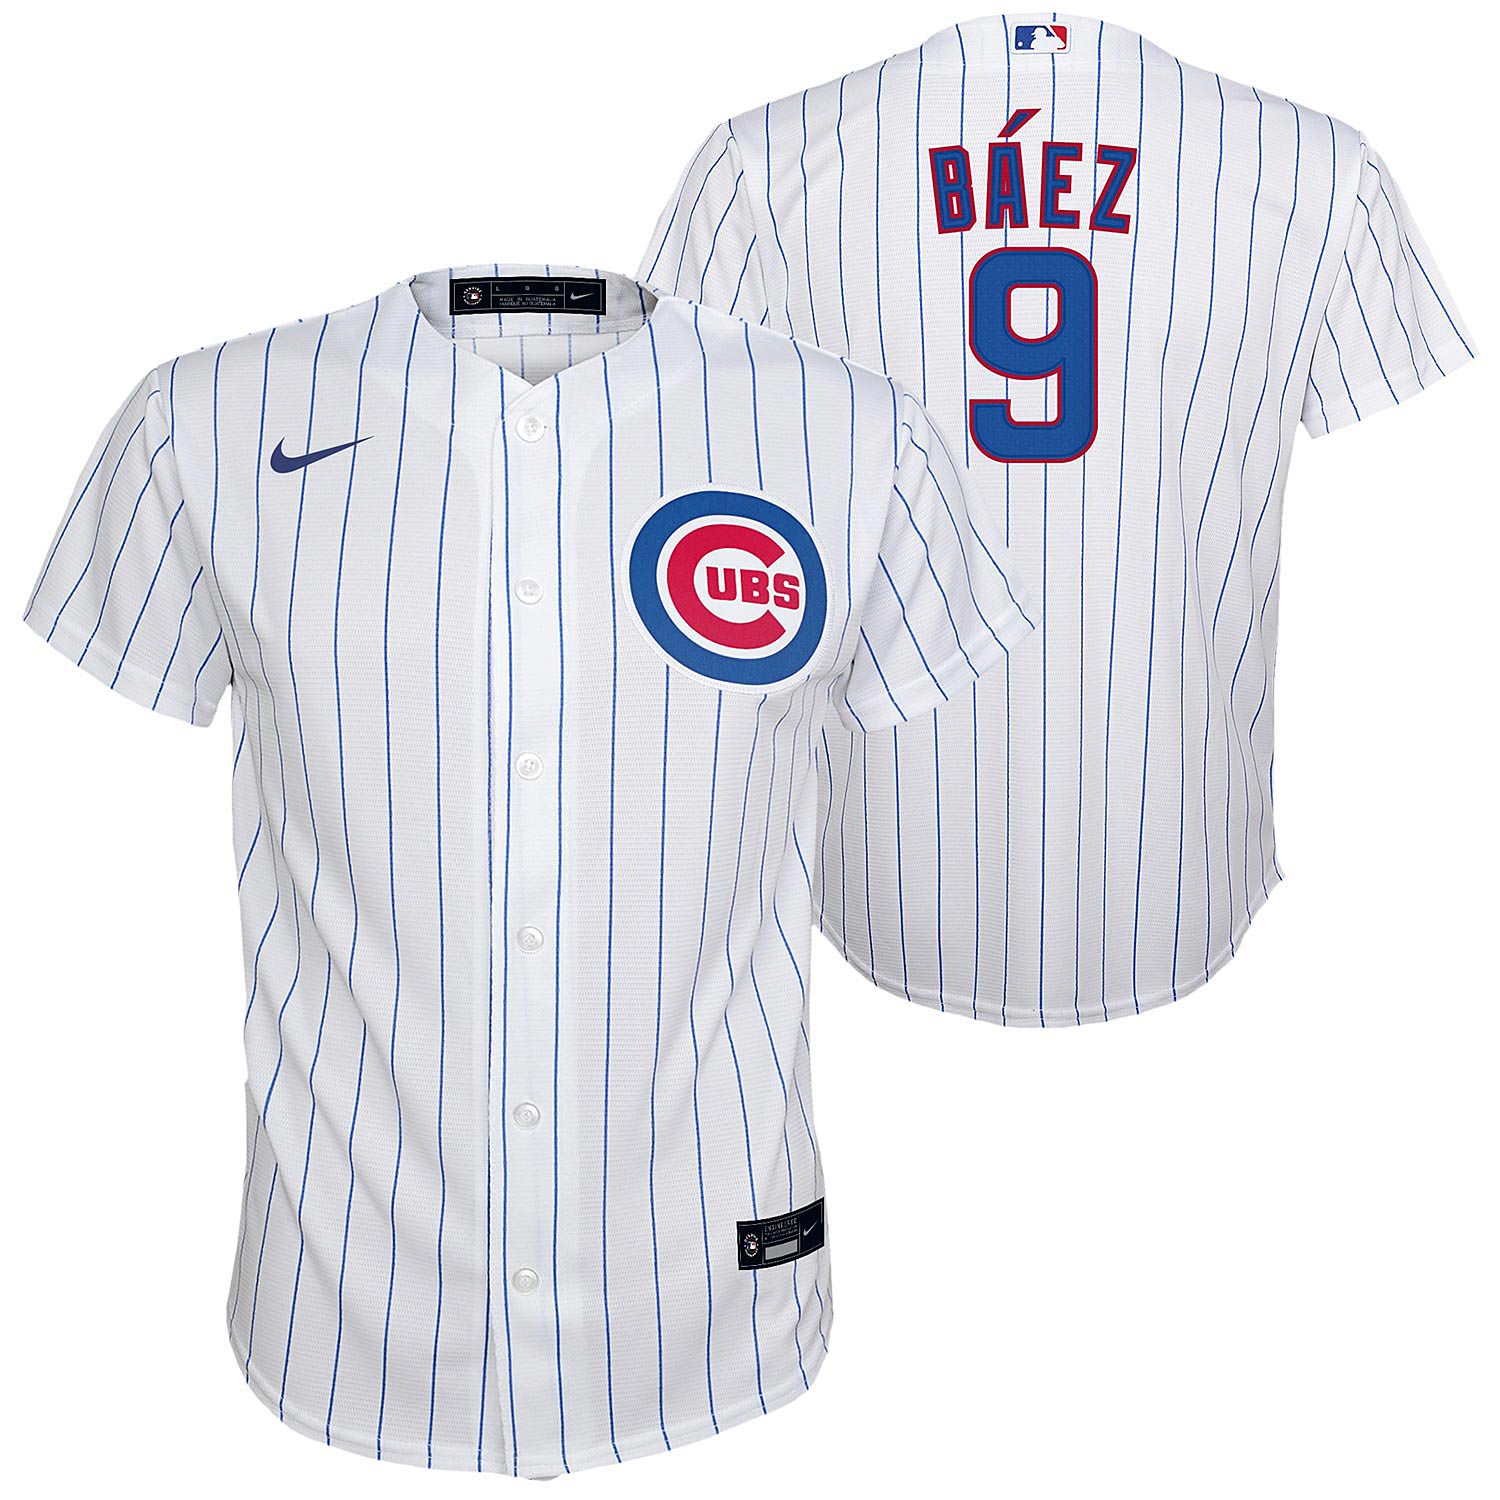 Youth Nike White Chicago Cubs Home 2020 Replica Team Jersey